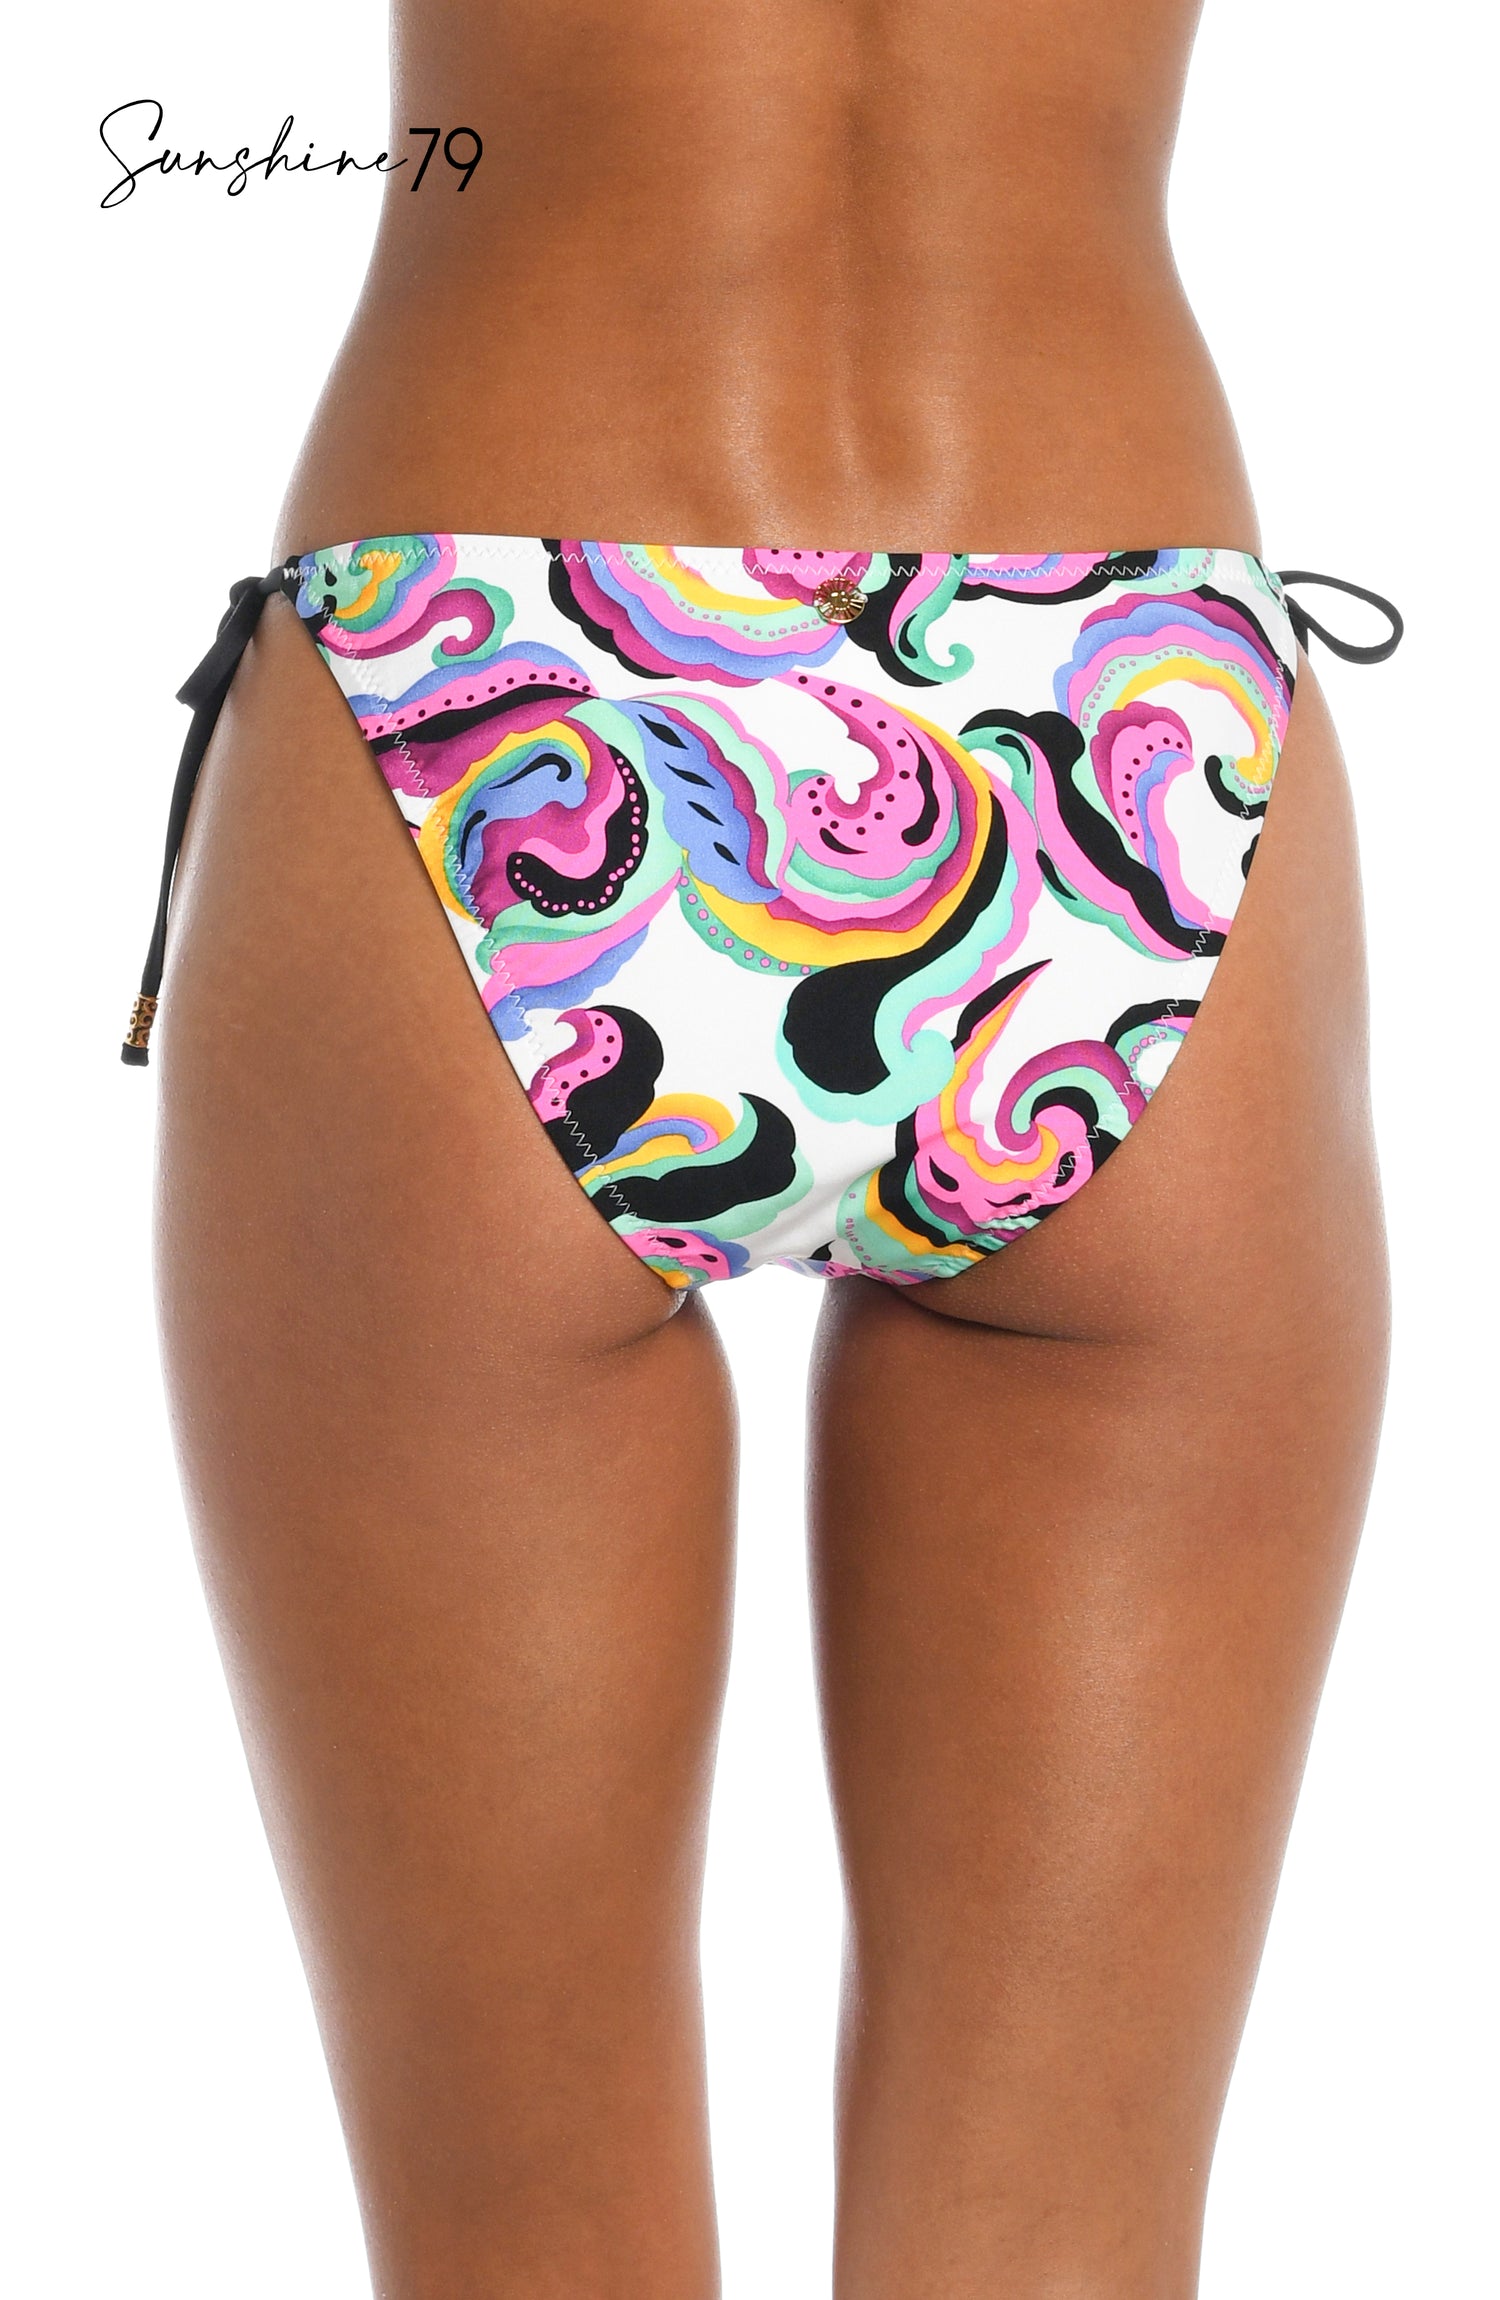 Model is wearing a multicolored swirl printed side tie hipster bottom from our Sunshine 79 brand.